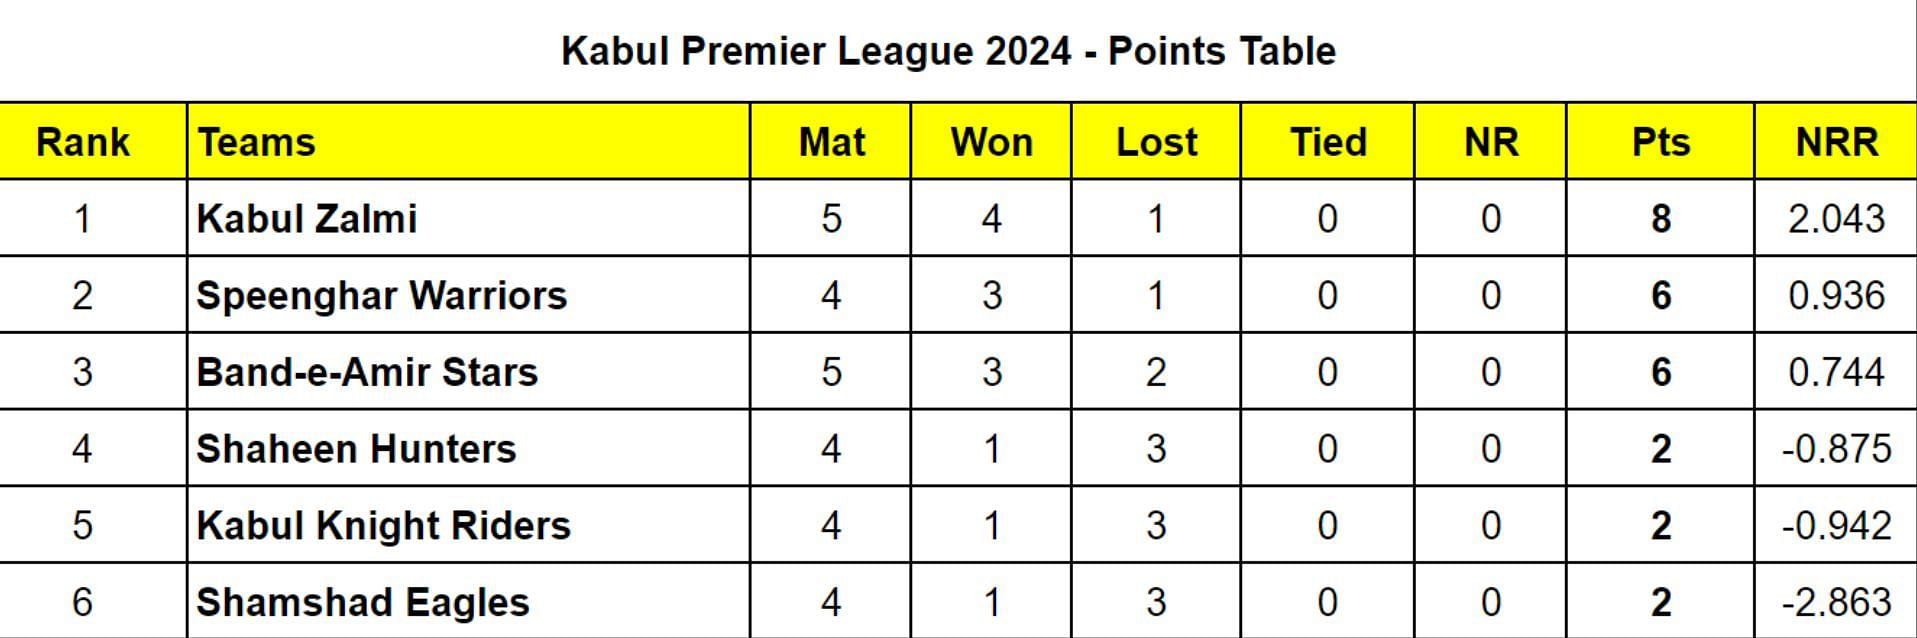 Kabul Premier League 2024 Points Table: Updated Standings after Kabul Zalmi vs Band-e-Amir Stars, Match 13